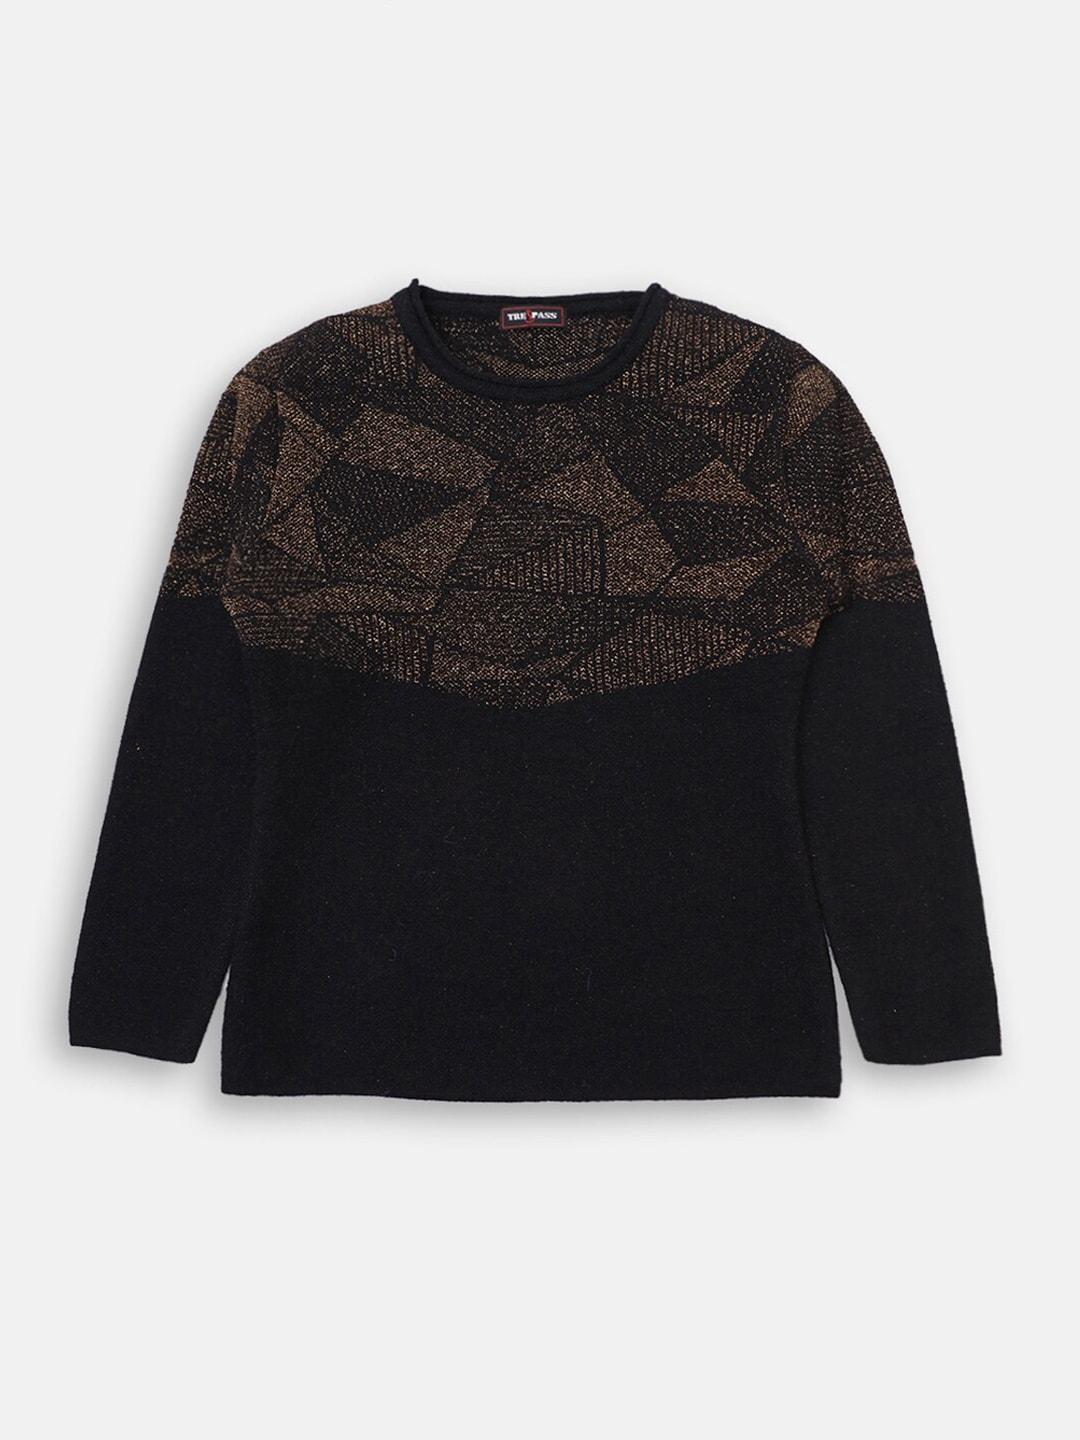 tre&pass-boys-black-&-brown-printed-woolen-pullover